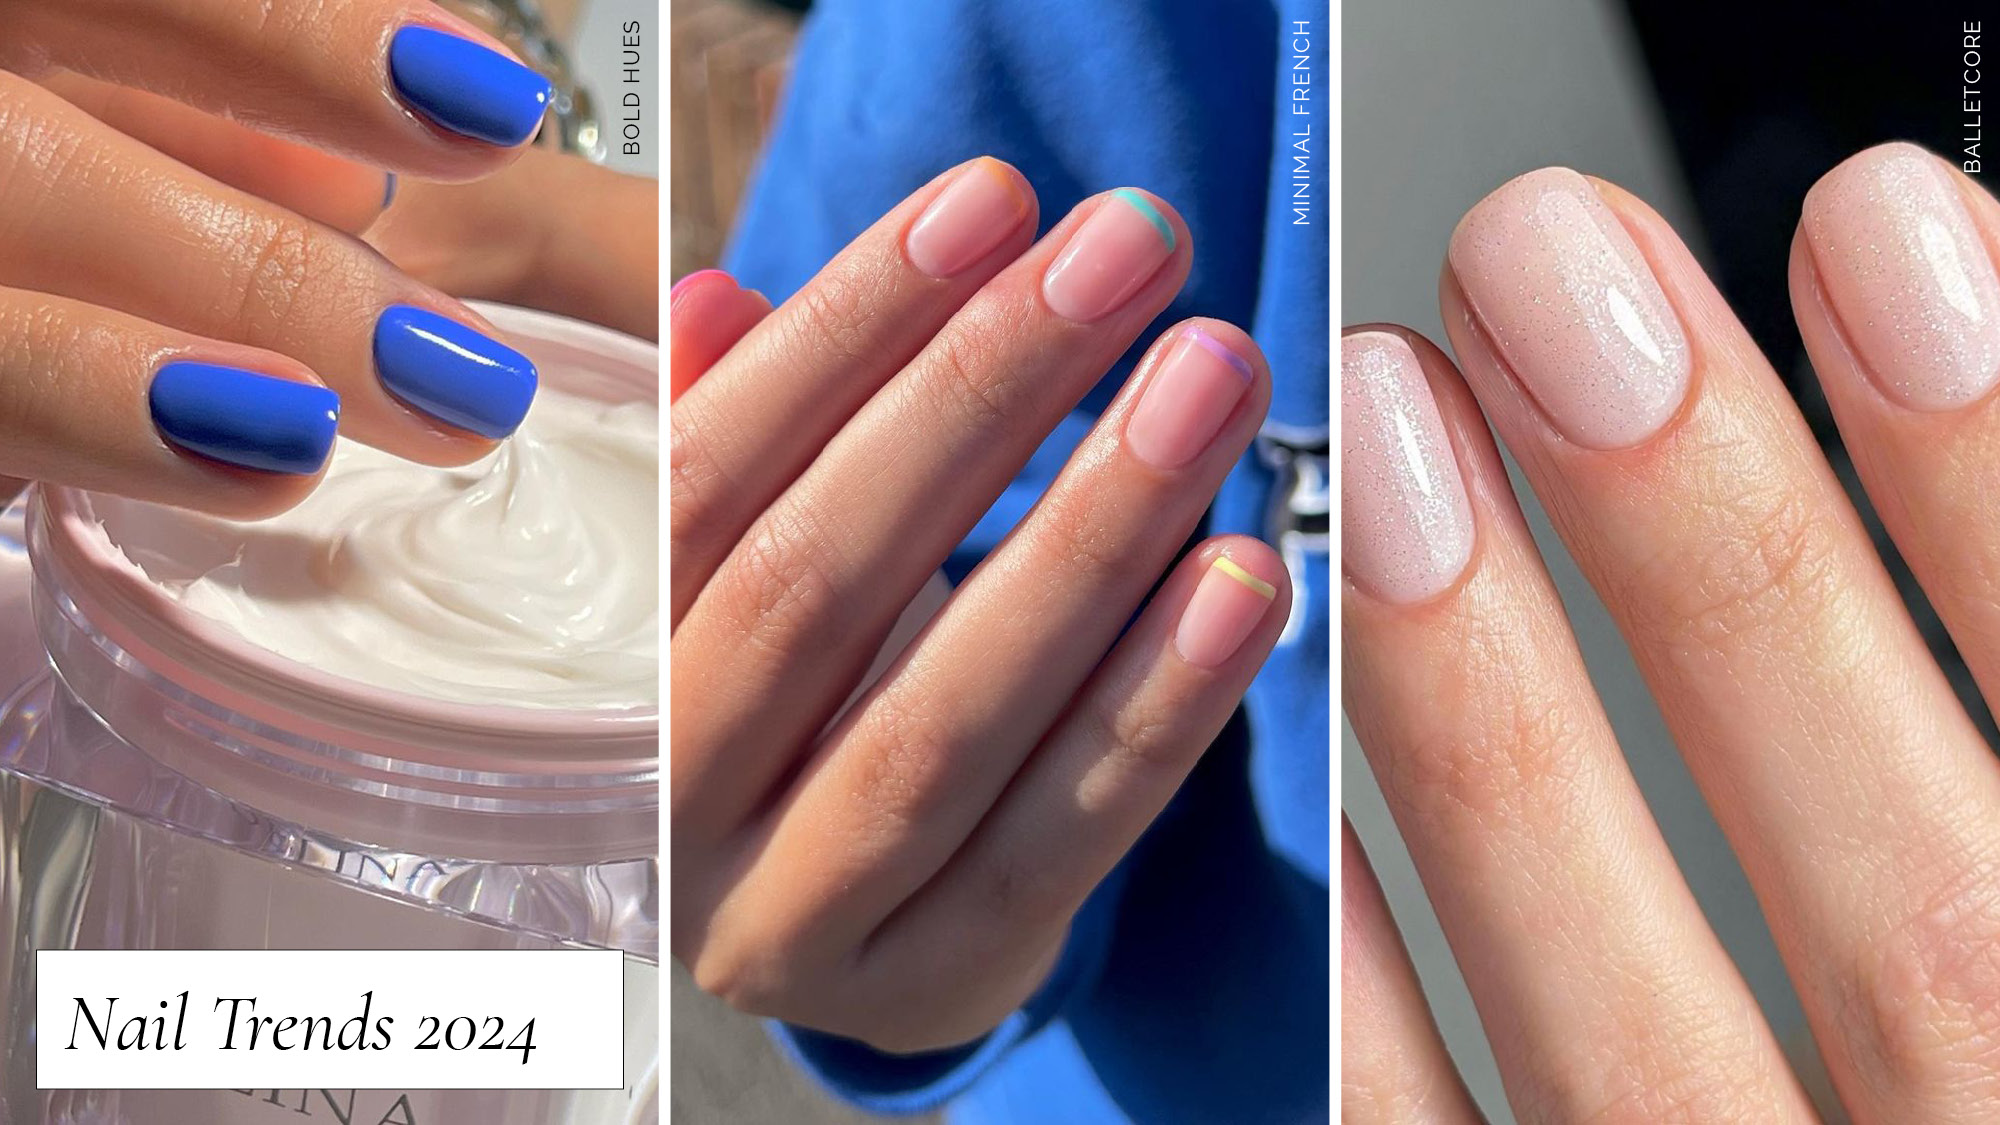 Trendy nail polish colors to wear this school year - GirlsLife